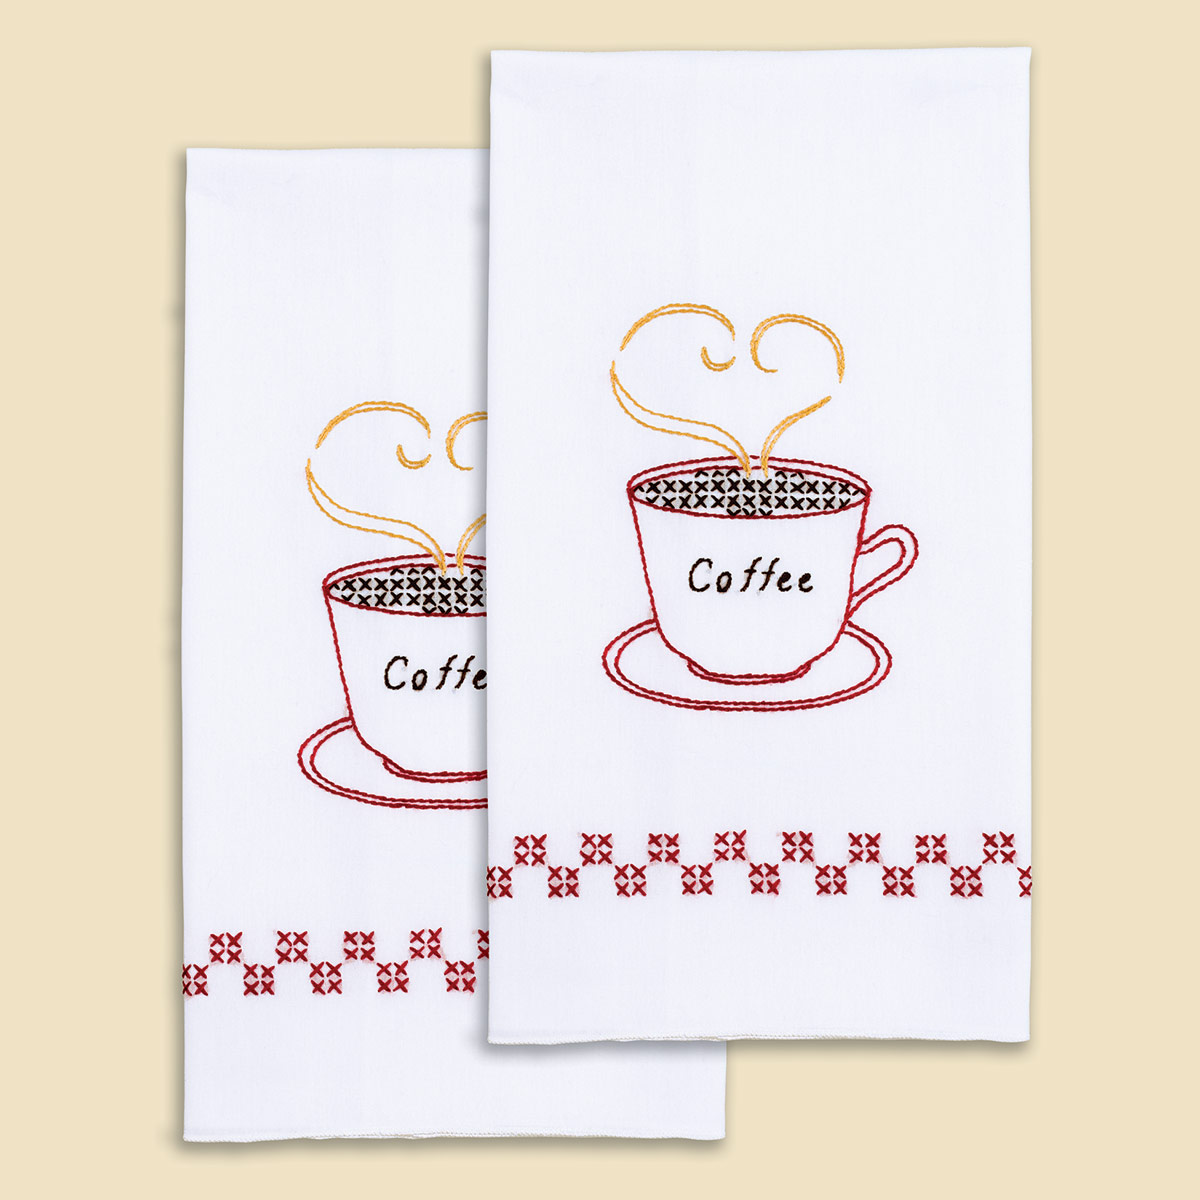 Coffee Time Decorative Hand Towels - Jack Dempsey Needle Art